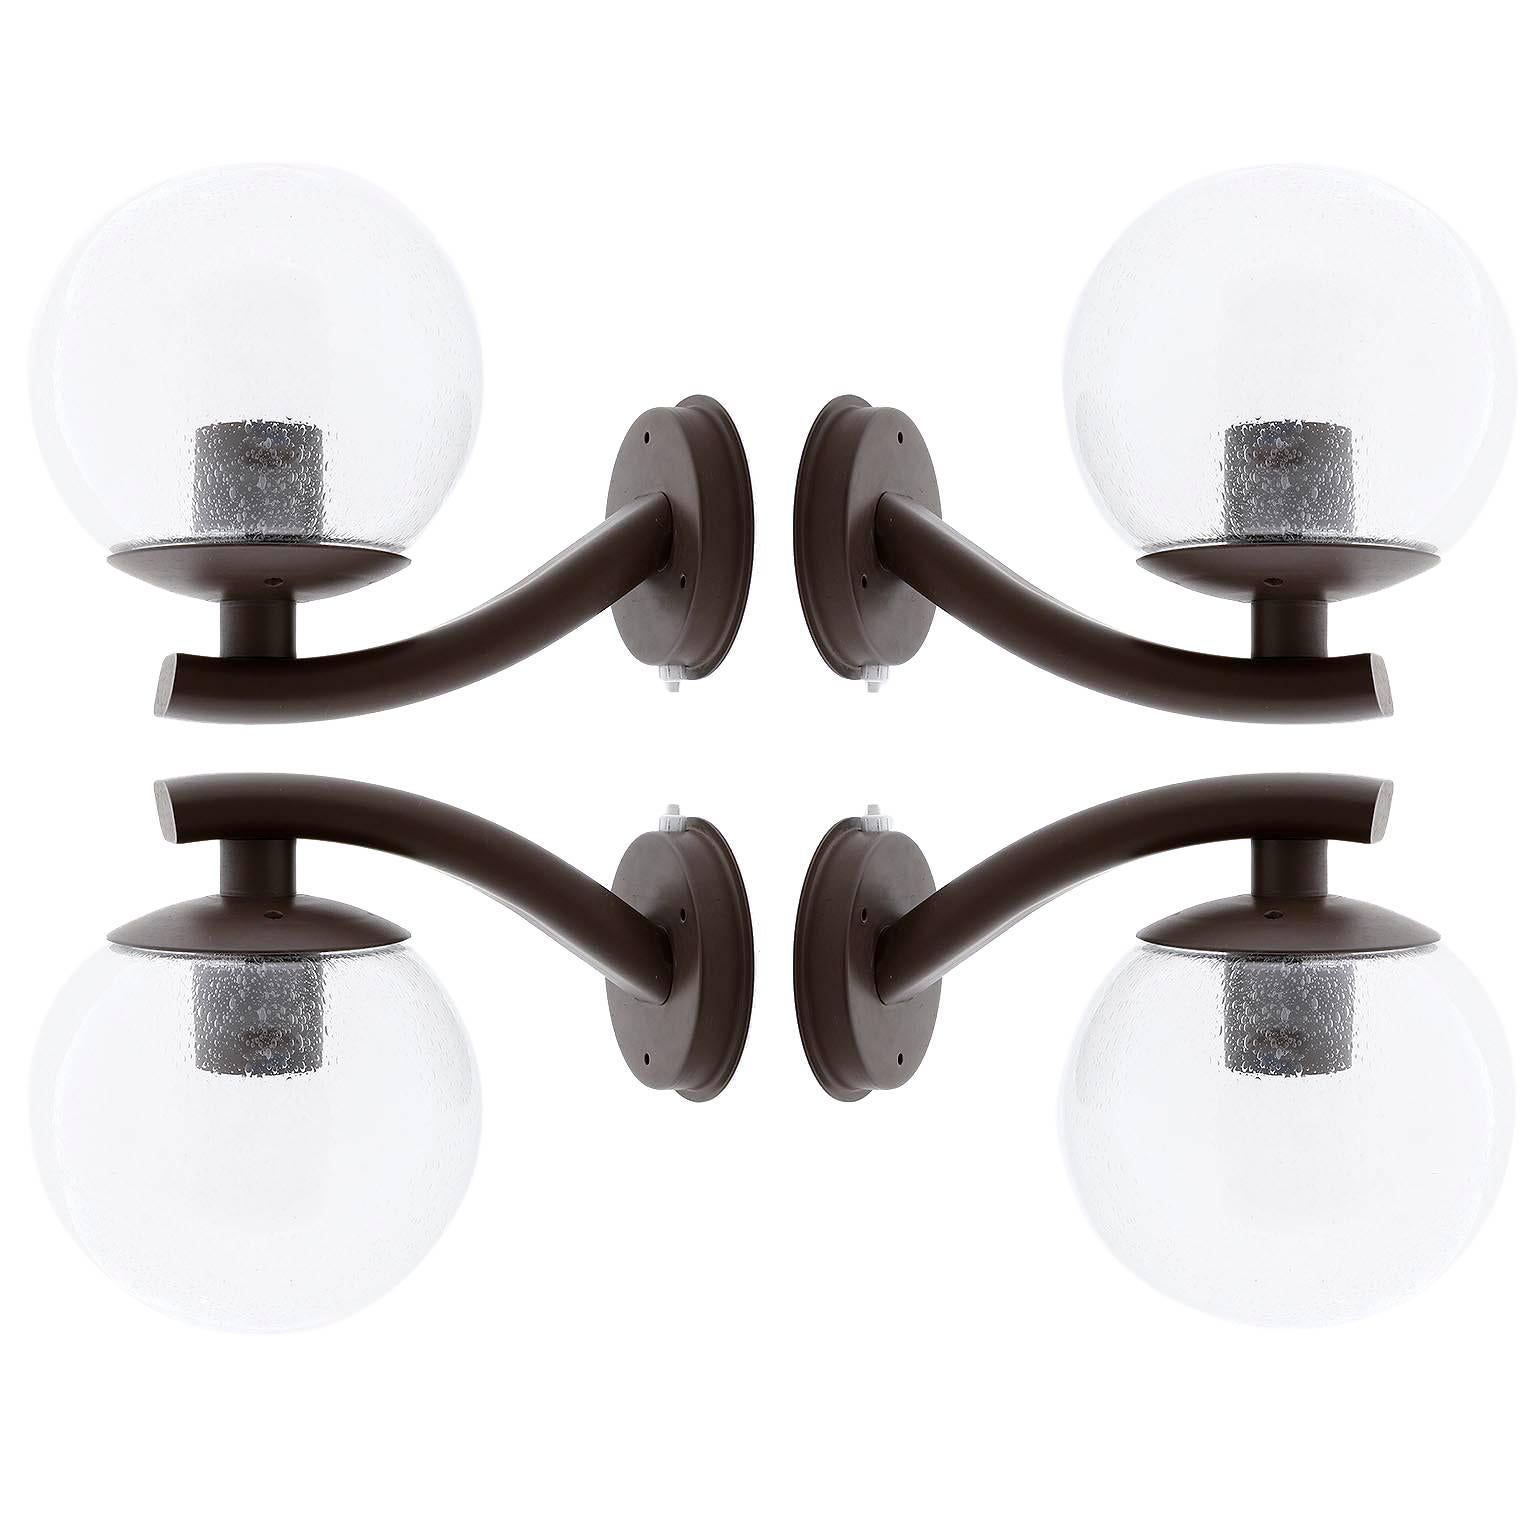 Eight RAAK Wall Lights Sconces, Bubble Glass Globes, 1970s